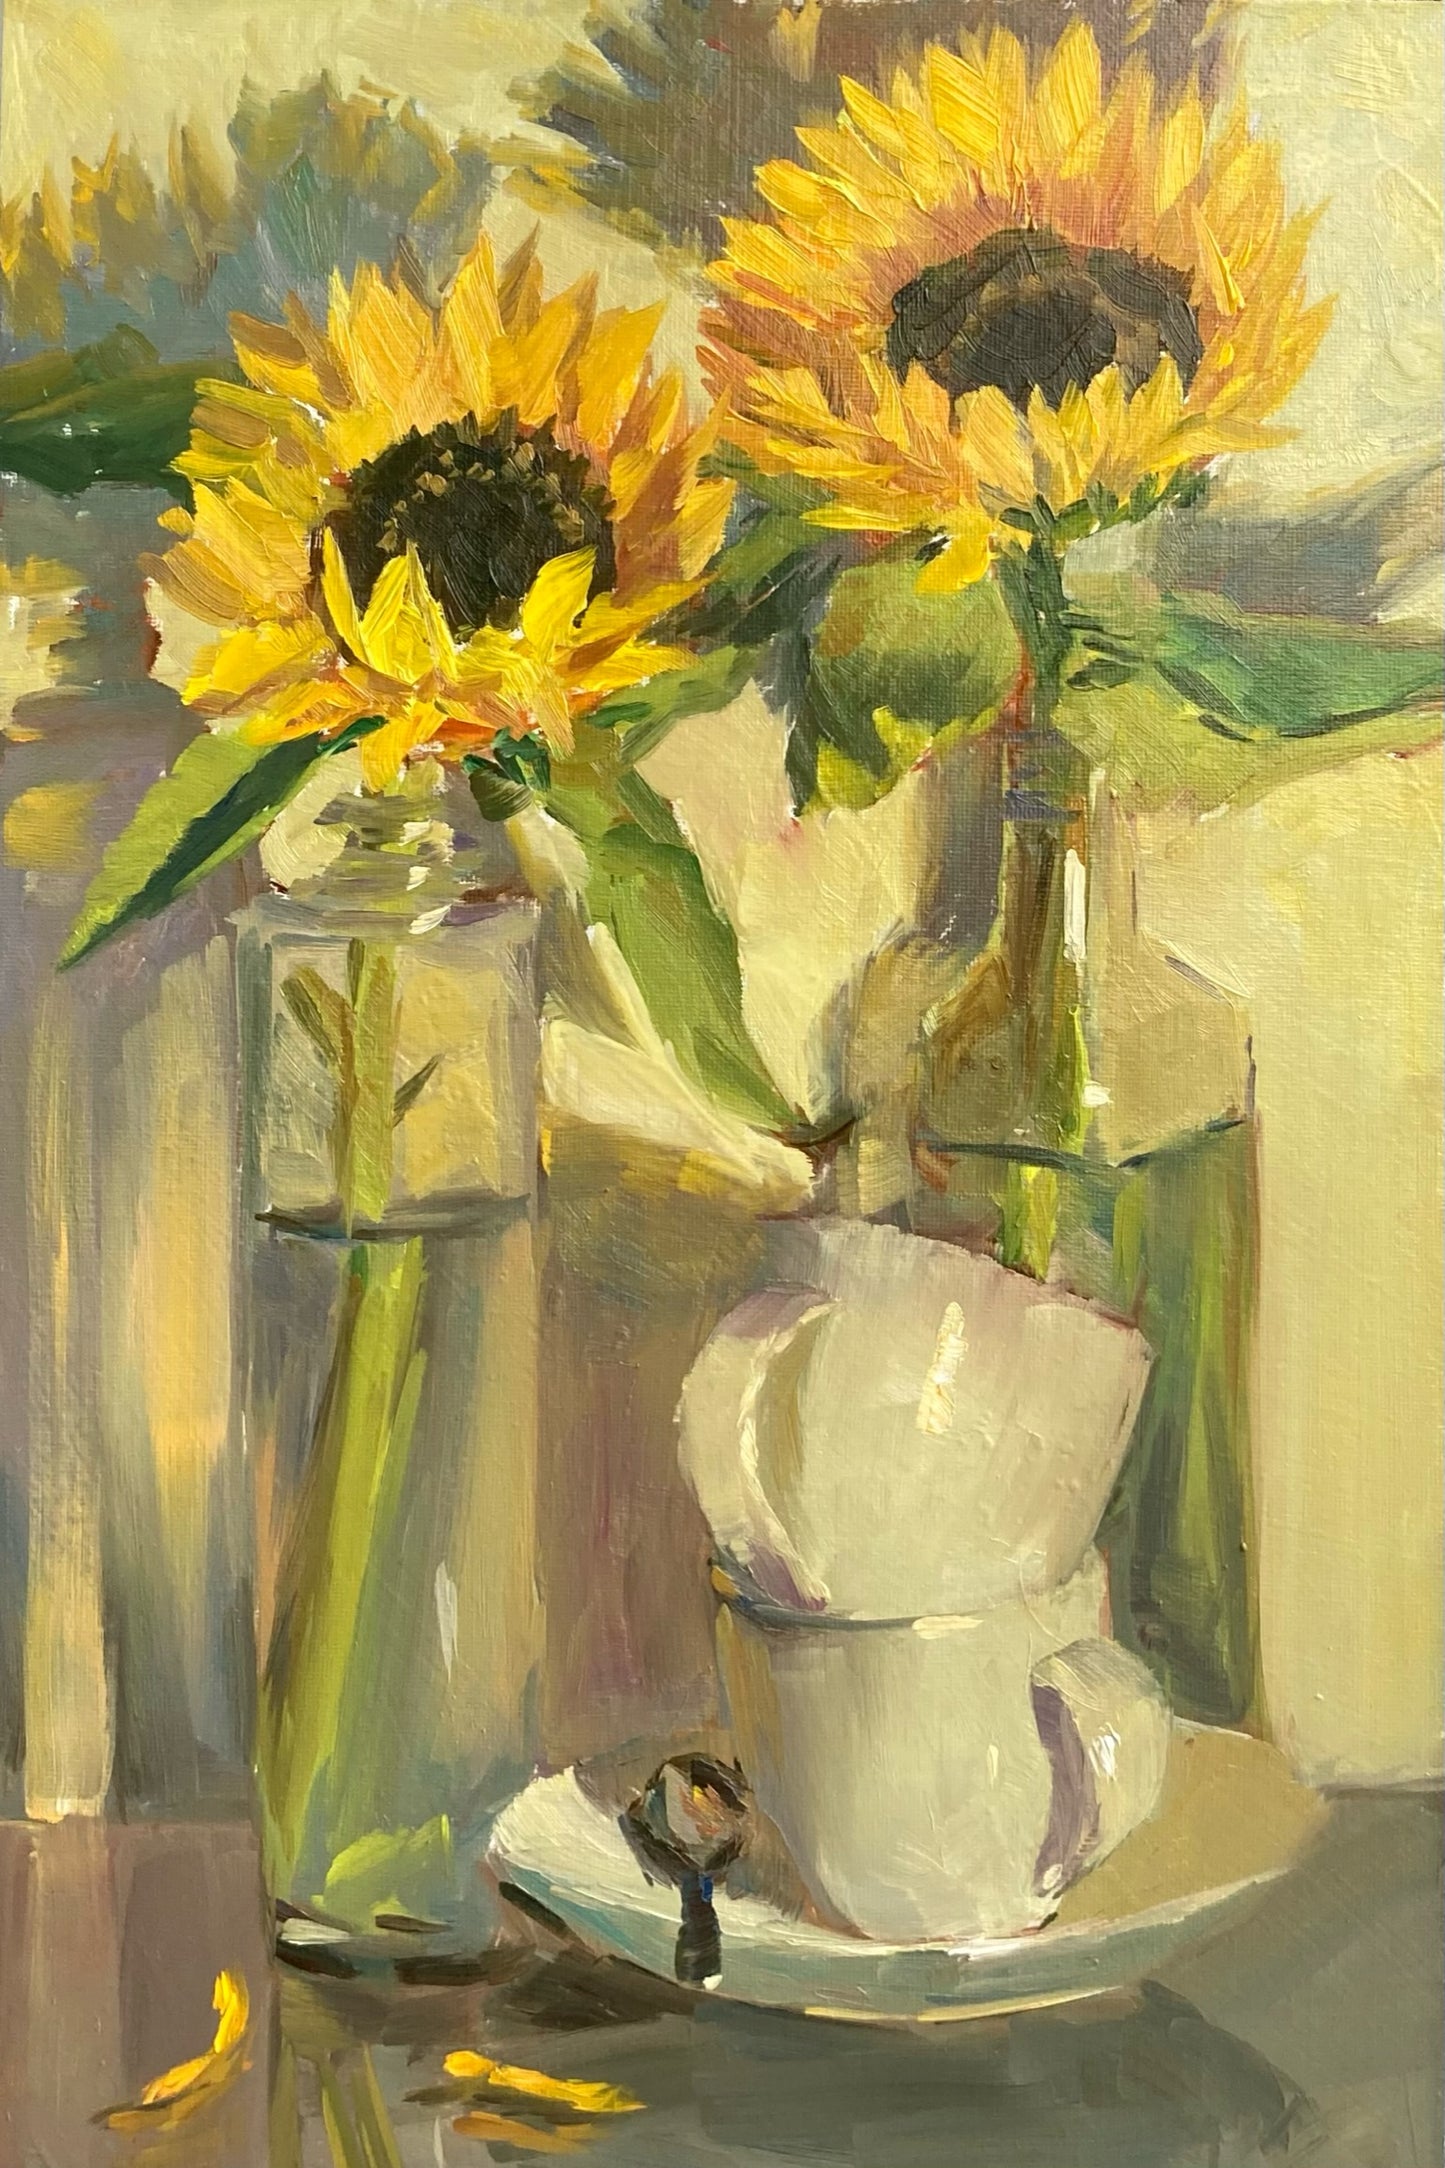 Sunflower Series 24 - Original Stilllife Painting, 8 by 12 inches